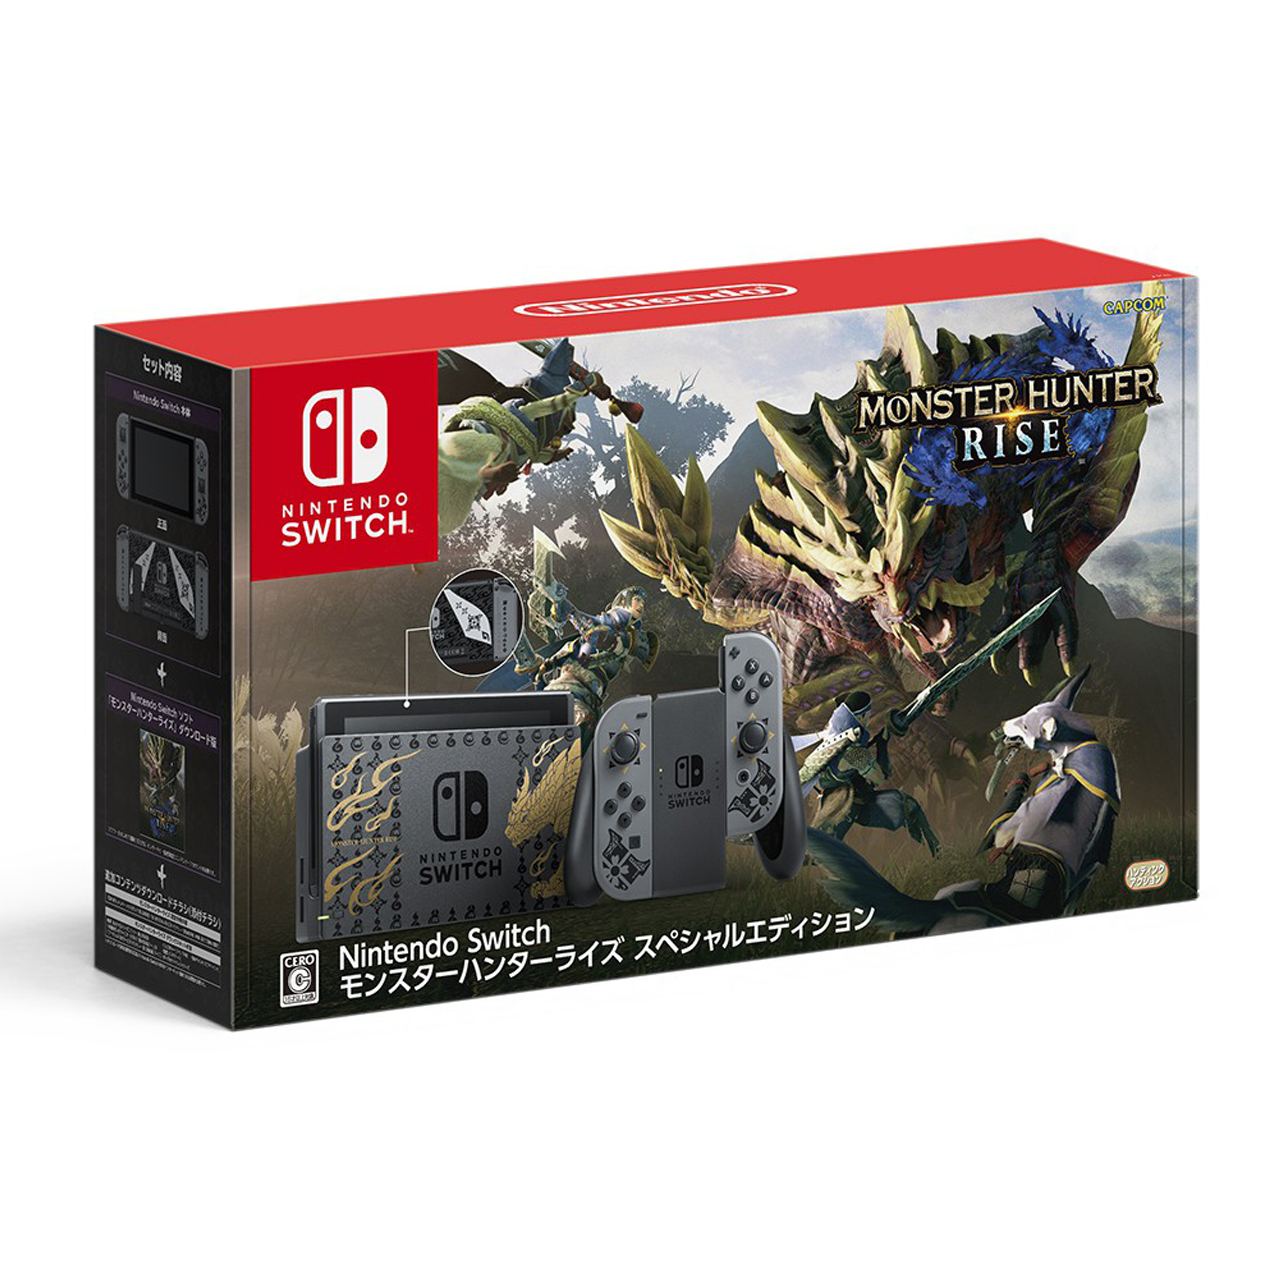 Nintendo Rise Hunter [Monster Switch Special Edition] 2) (Generation